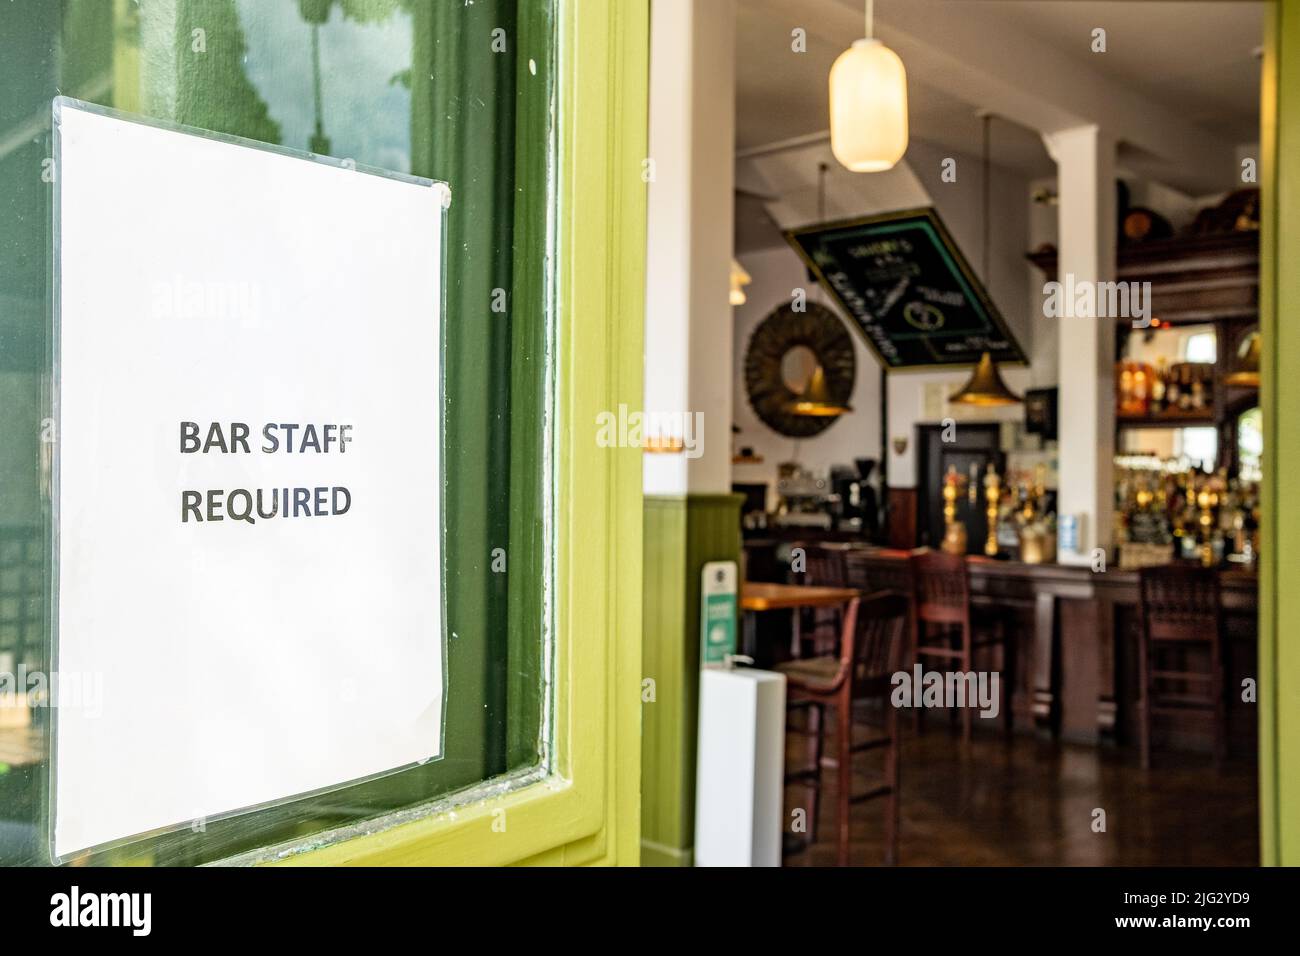 Job advert for Bar Staff on entrance of British public house Stock Photo